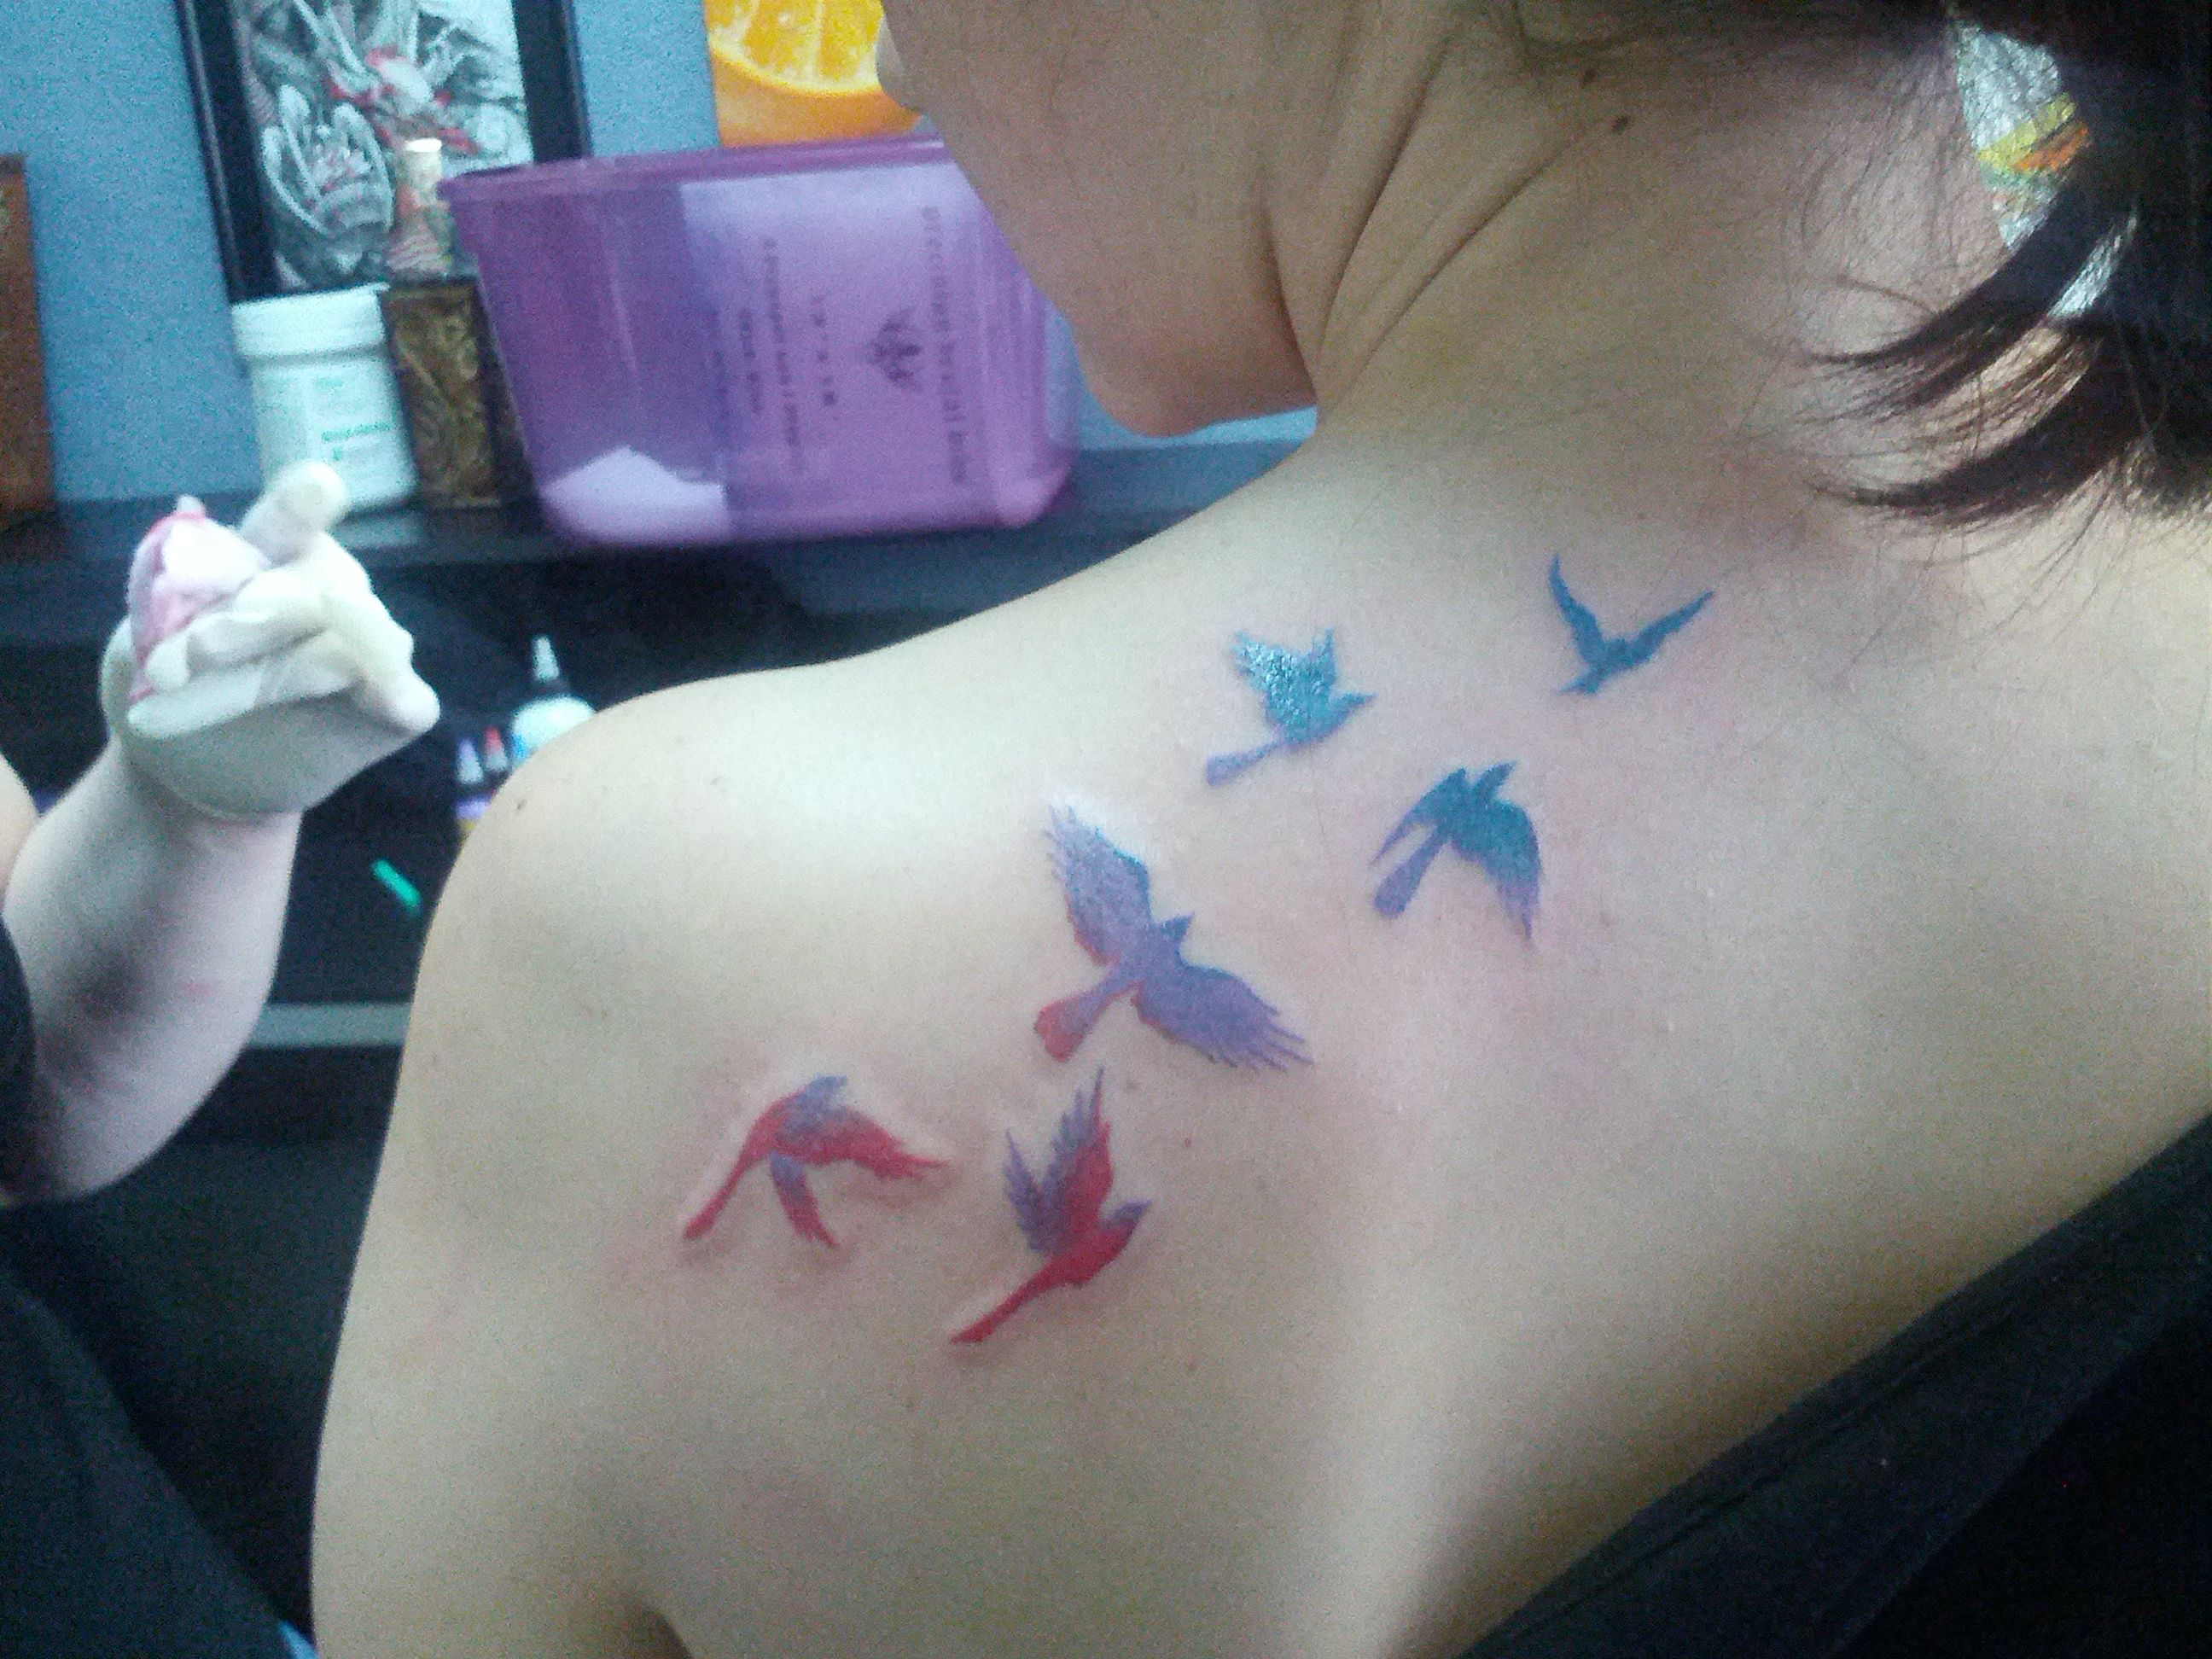 No Outline Just Color Tattoo Love It Tats To Love Tattoos regarding dimensions 2592 X 1944